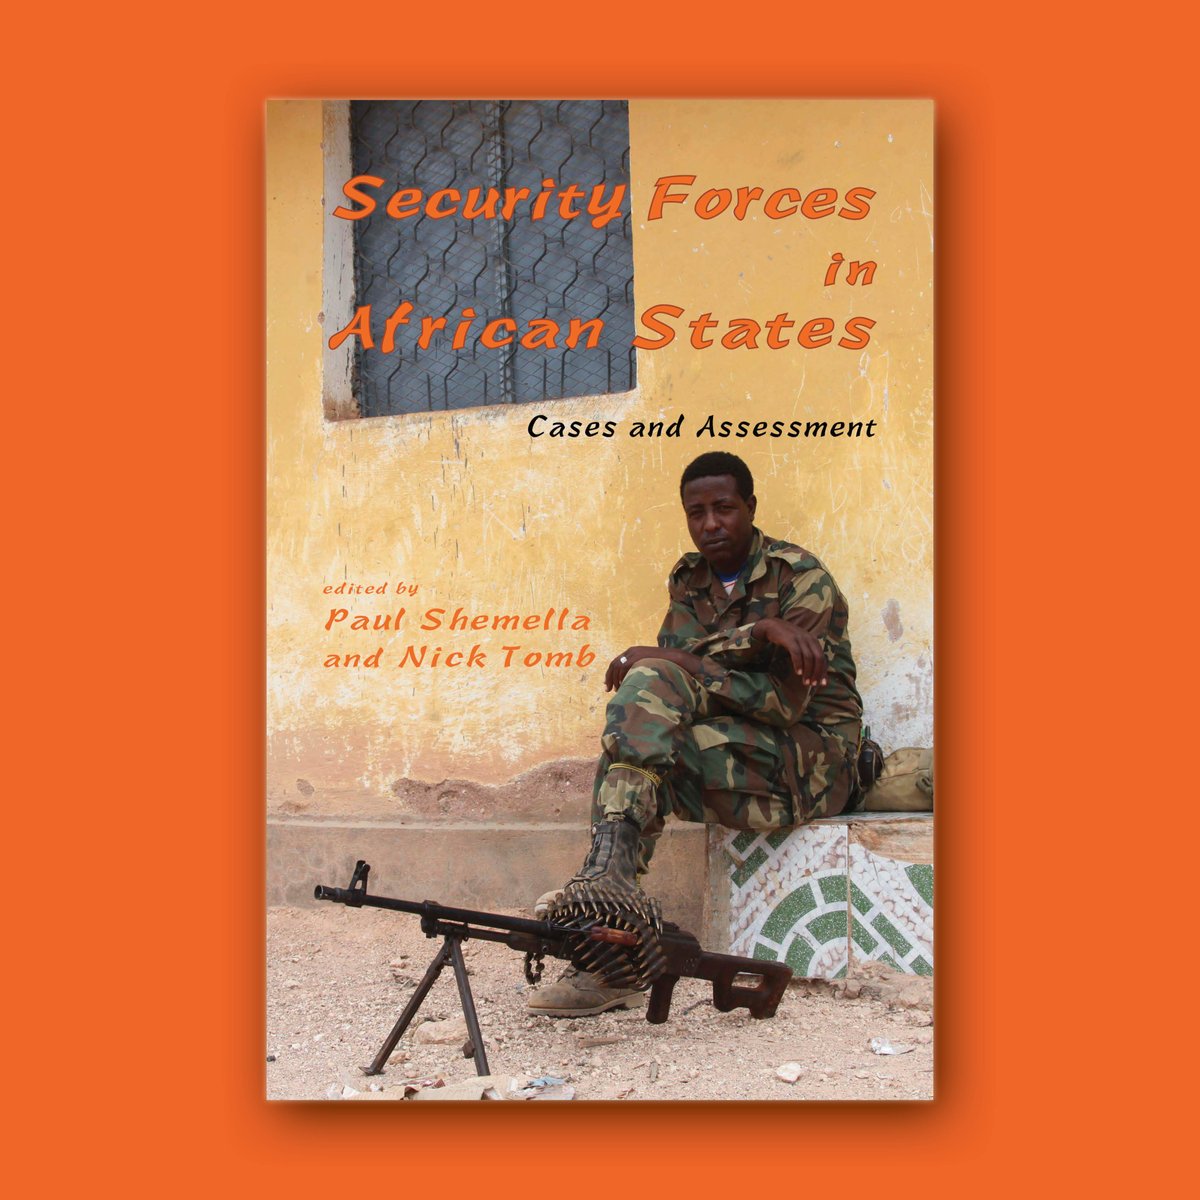 'Brilliantly written by security experts who know Africa, this book is a must read for security professionals, academics and students.” —Russell D. Howard, Brigadier General (ret), US Army Special Forces & Senior Fellow, Joint Special Operations University ow.ly/K3Mm50RqcTU